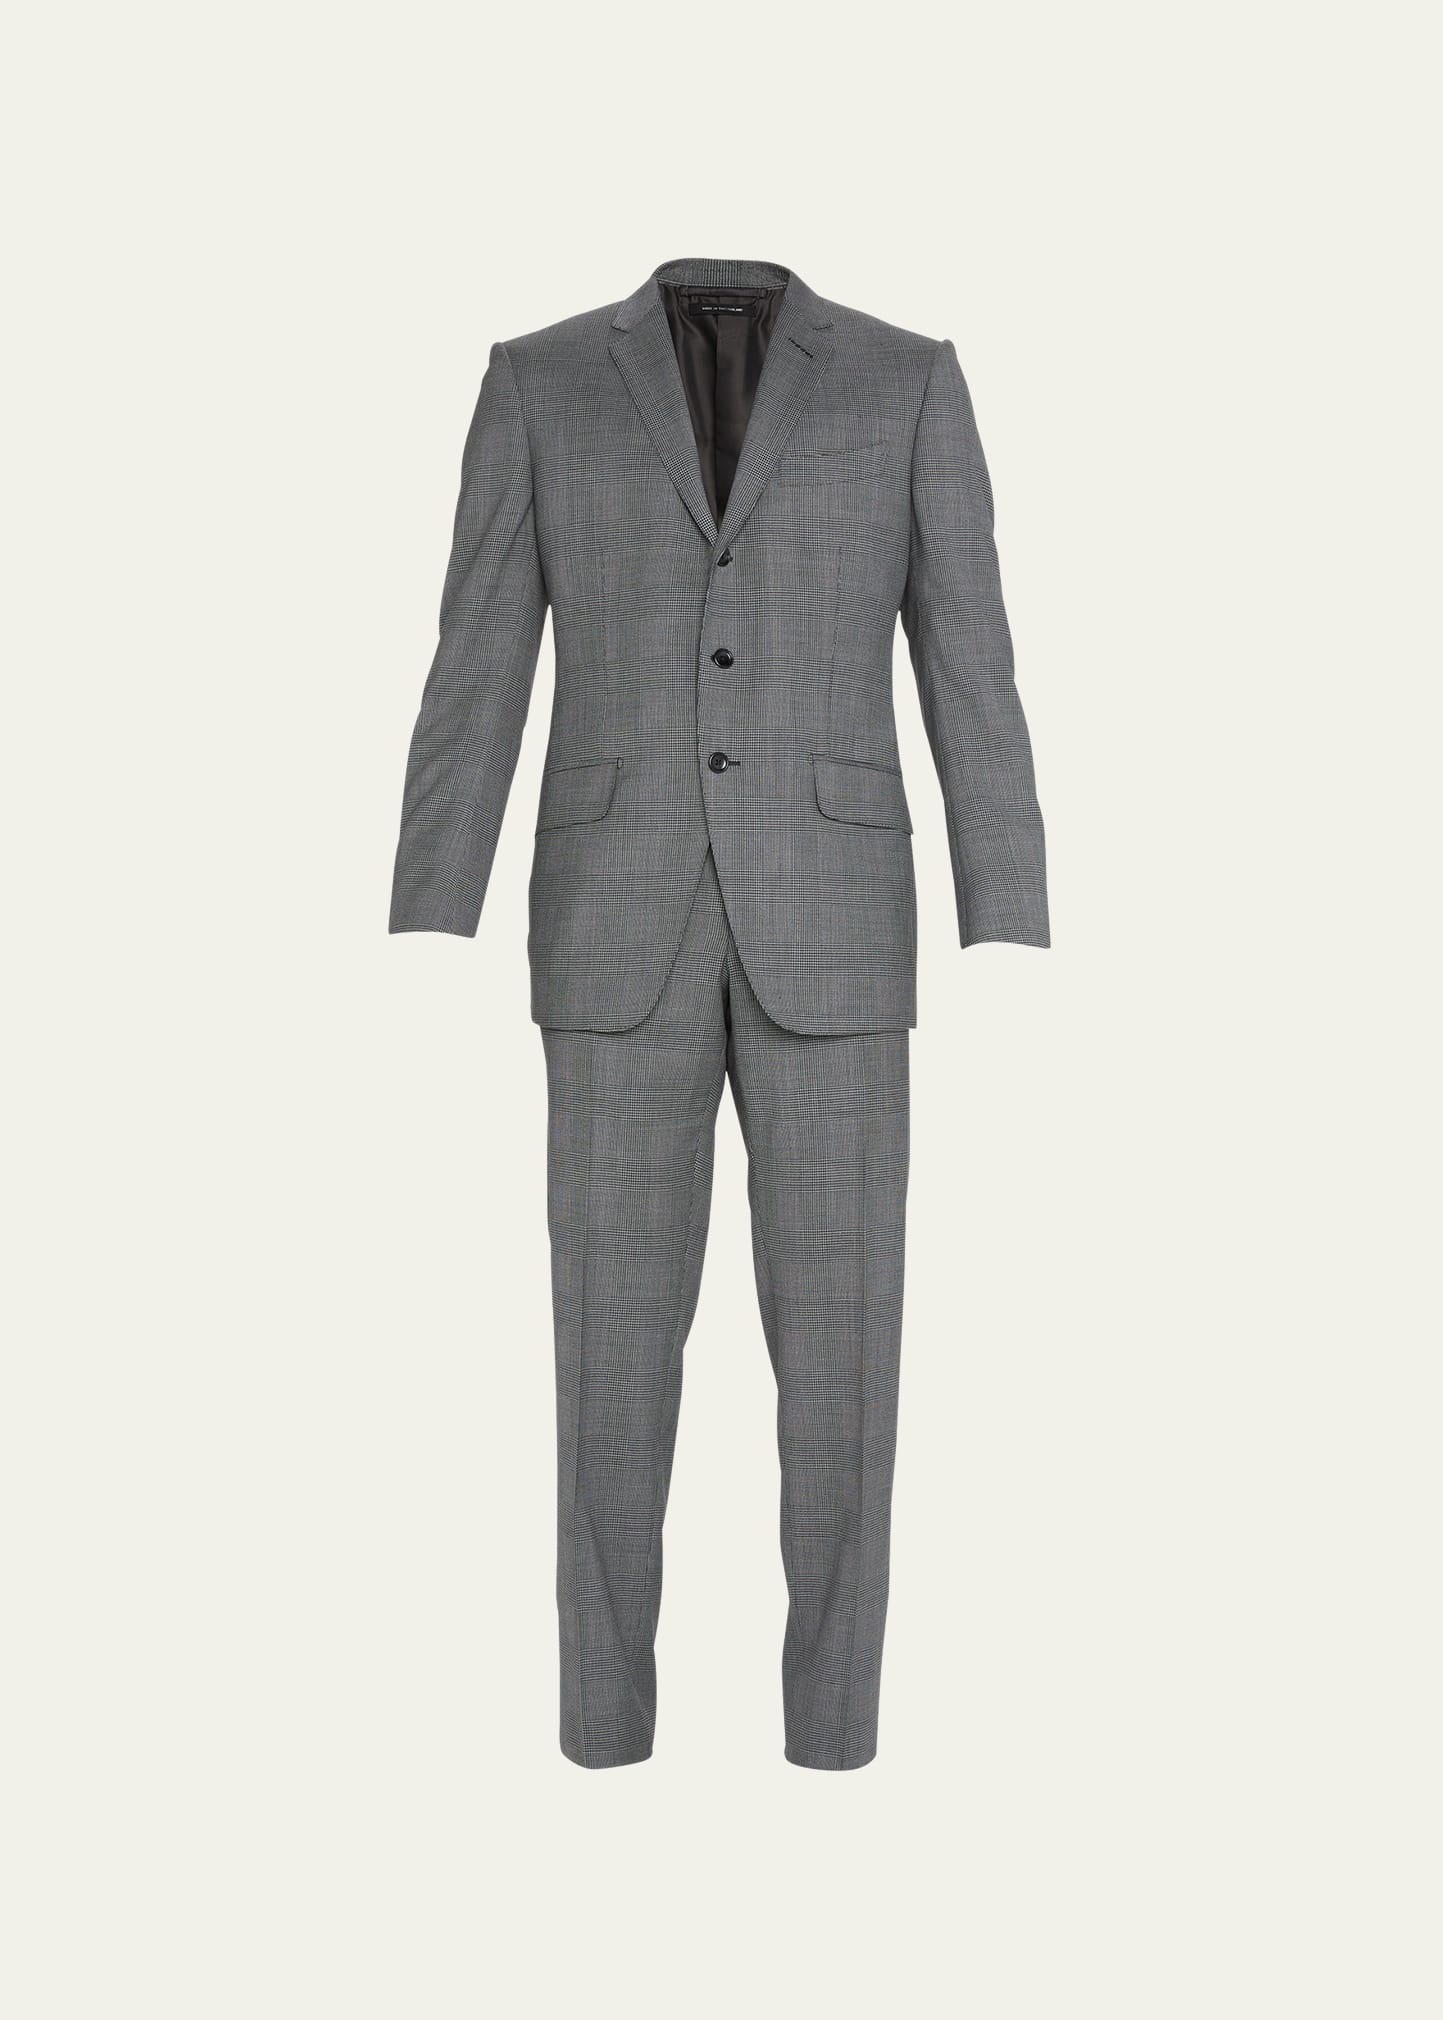 TOM FORD MEN'S O'CONNOR PRINCE OF WALES SUIT